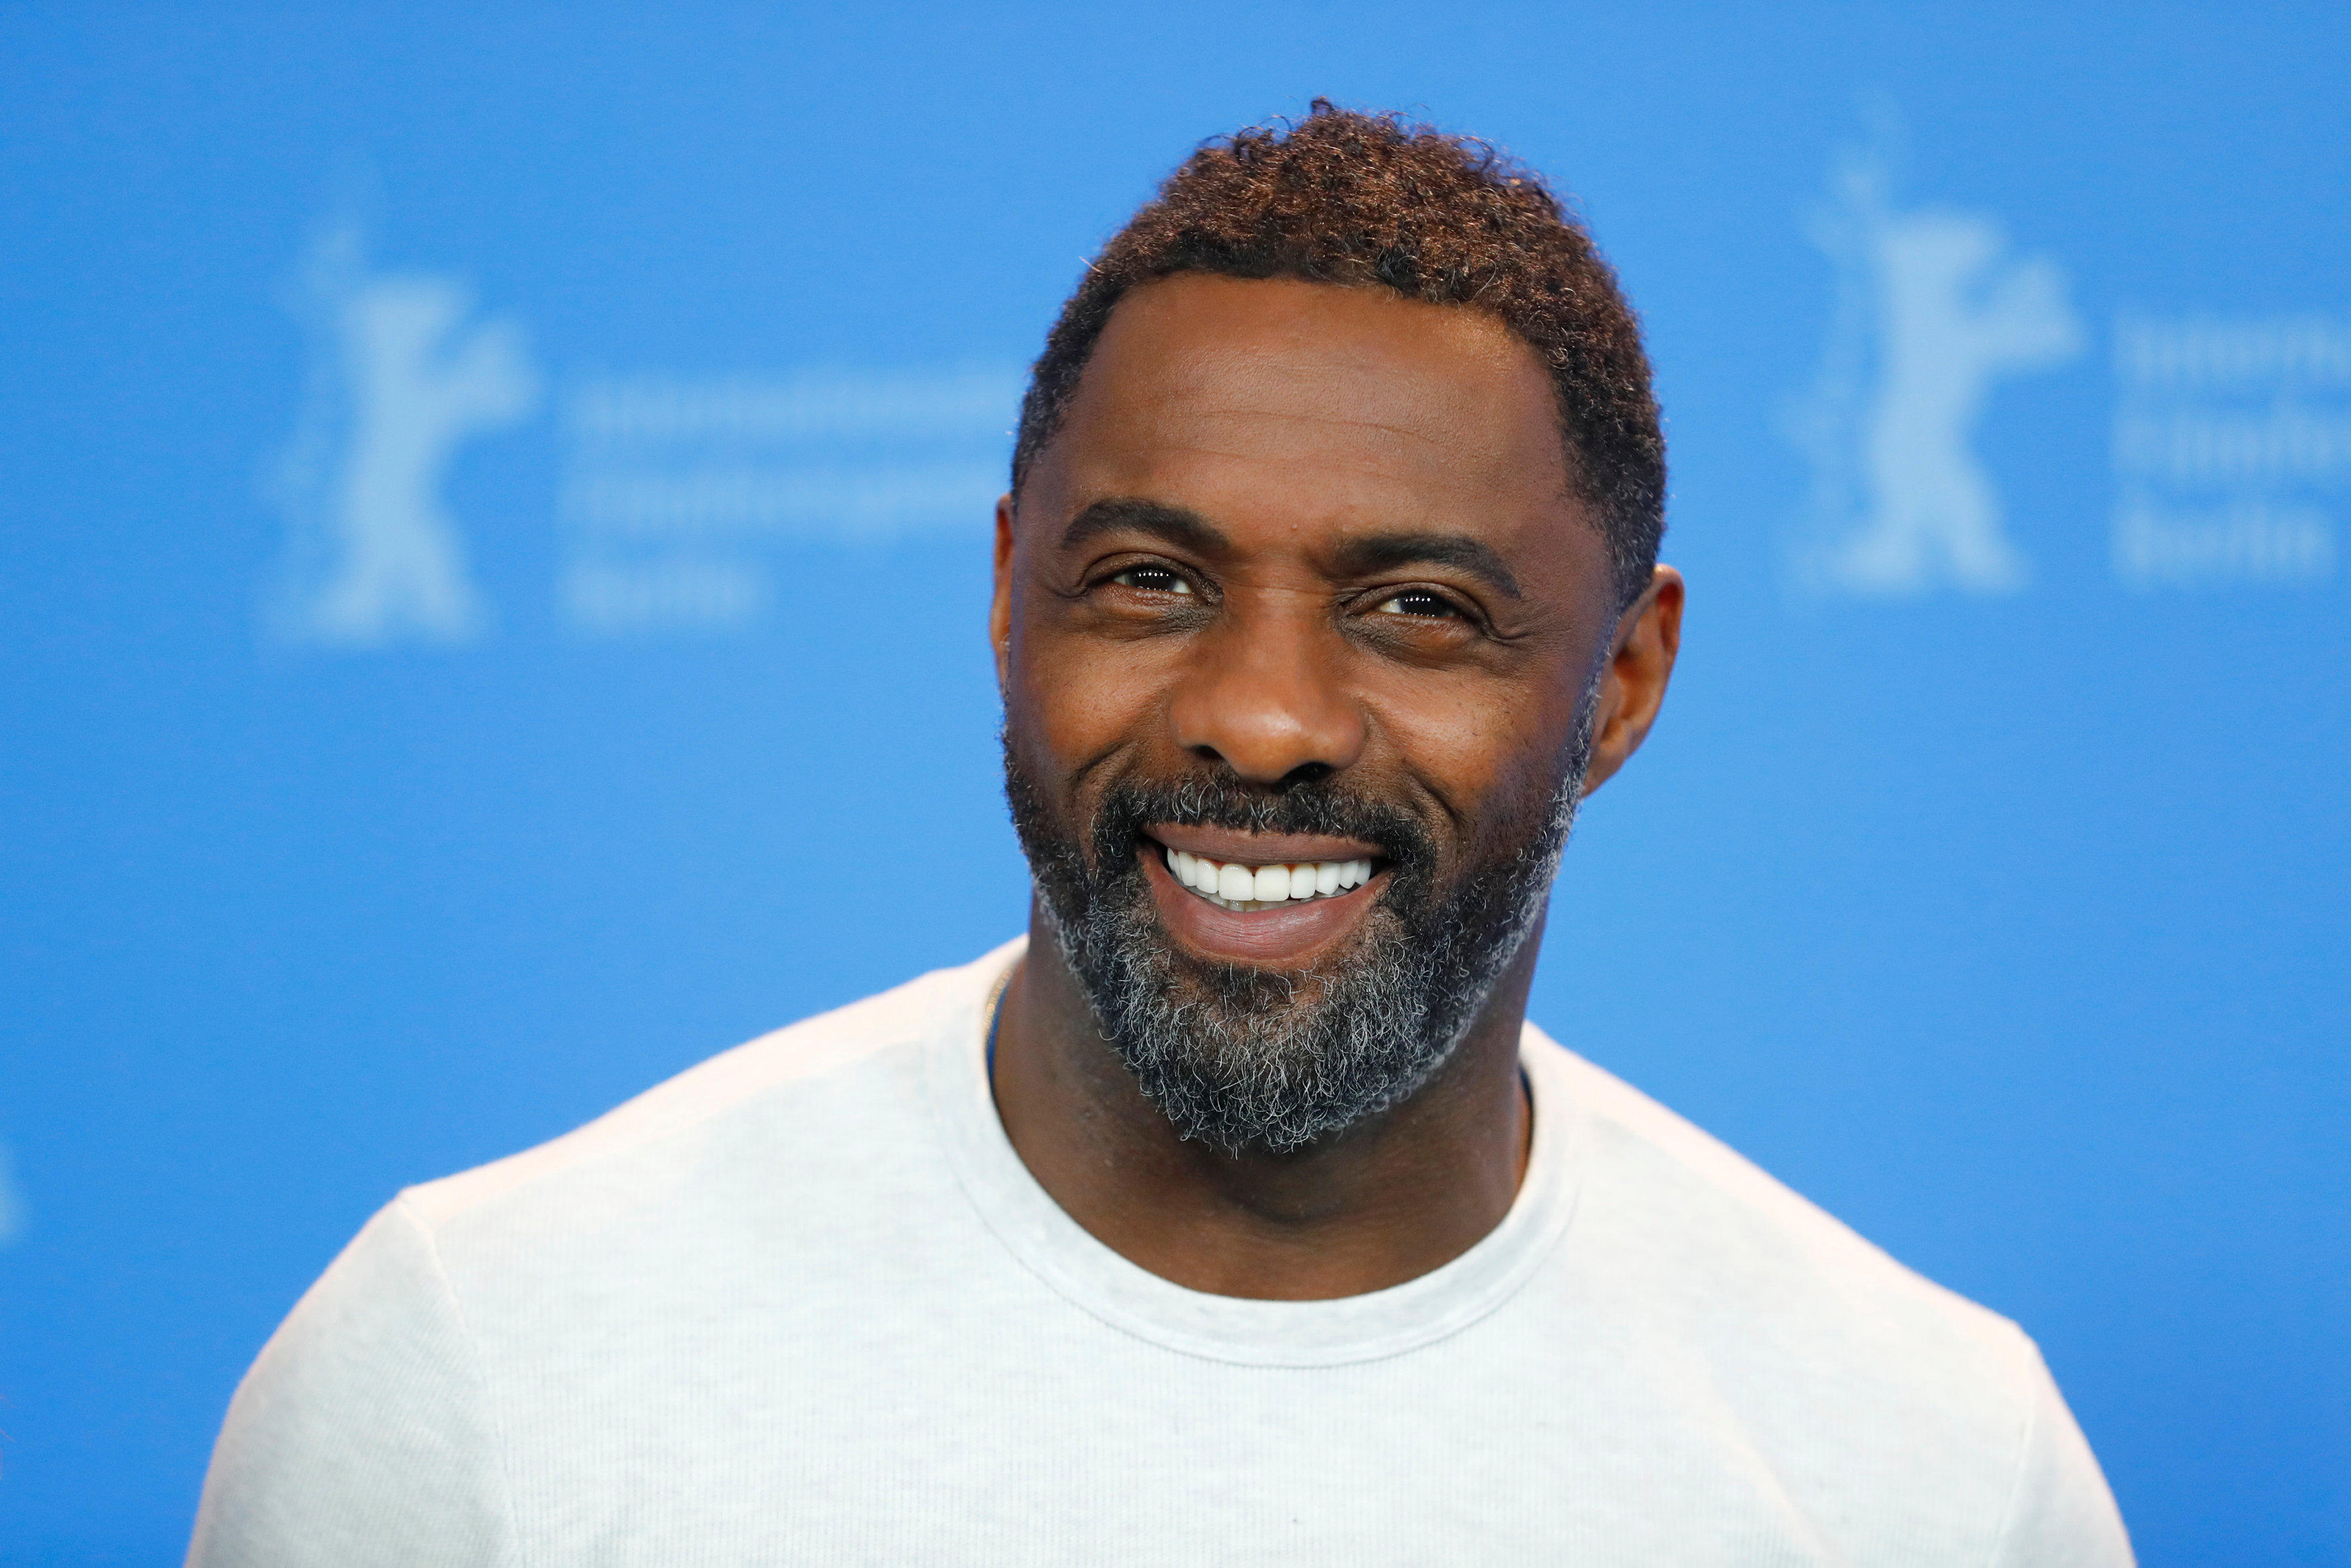 Idris Elba named this year's Sexiest Man Alive by People magazine CBS News